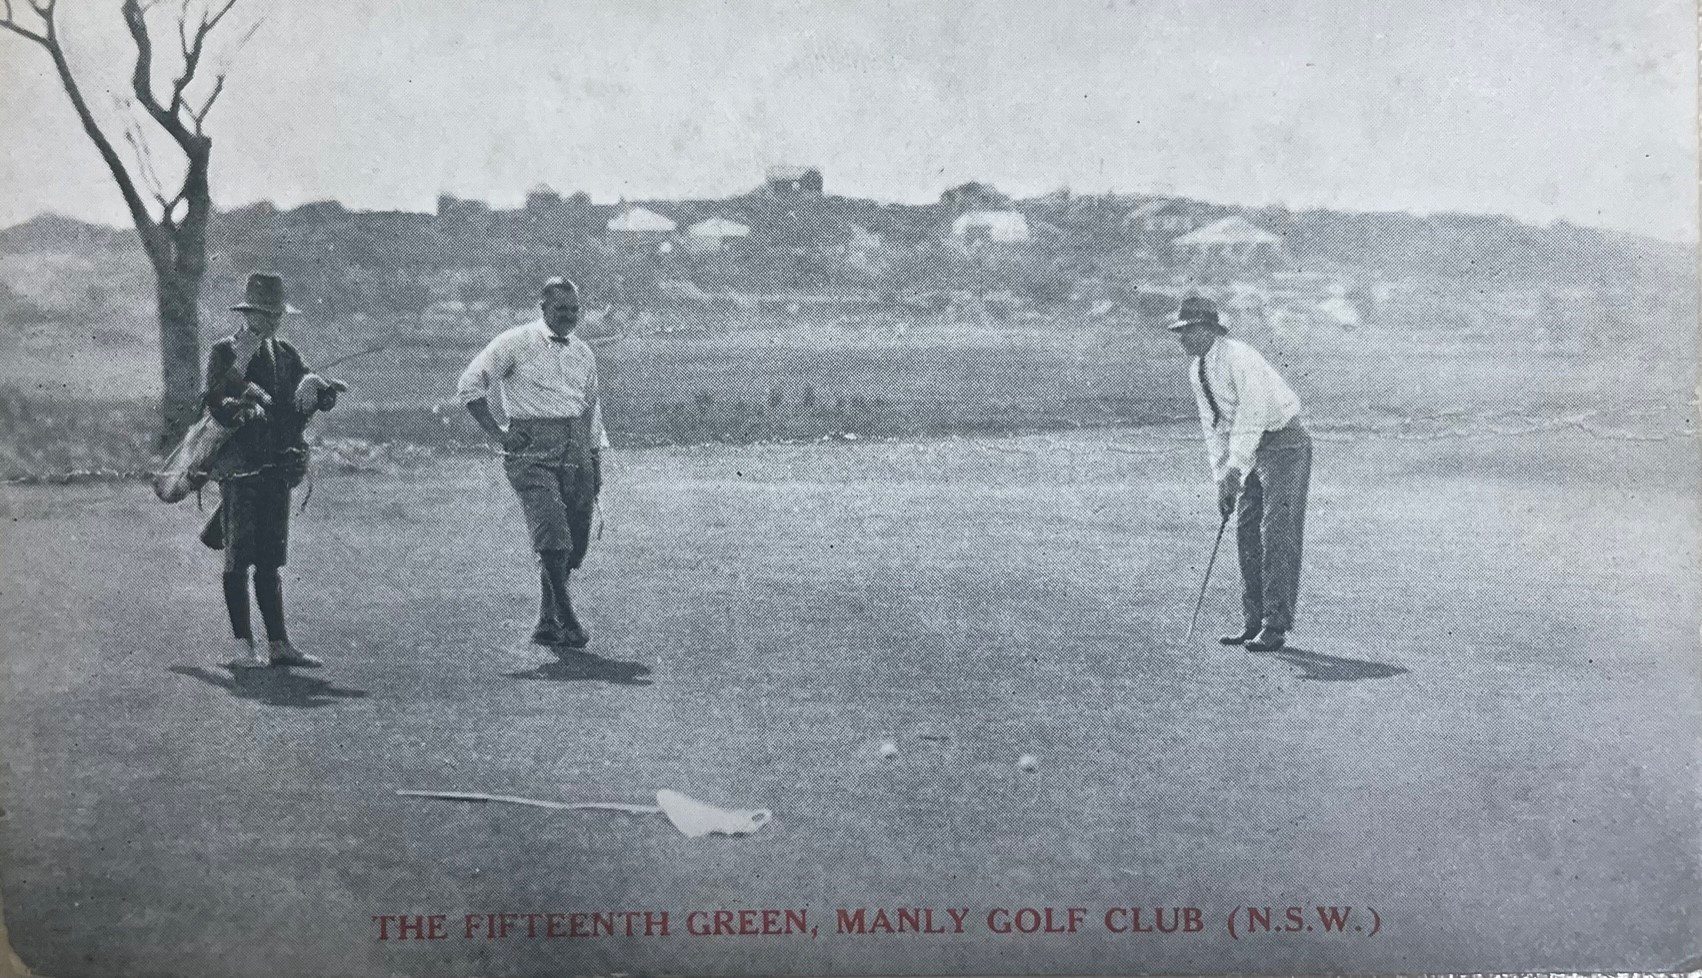 Golfers on the 15th Green at Manly Golf Club